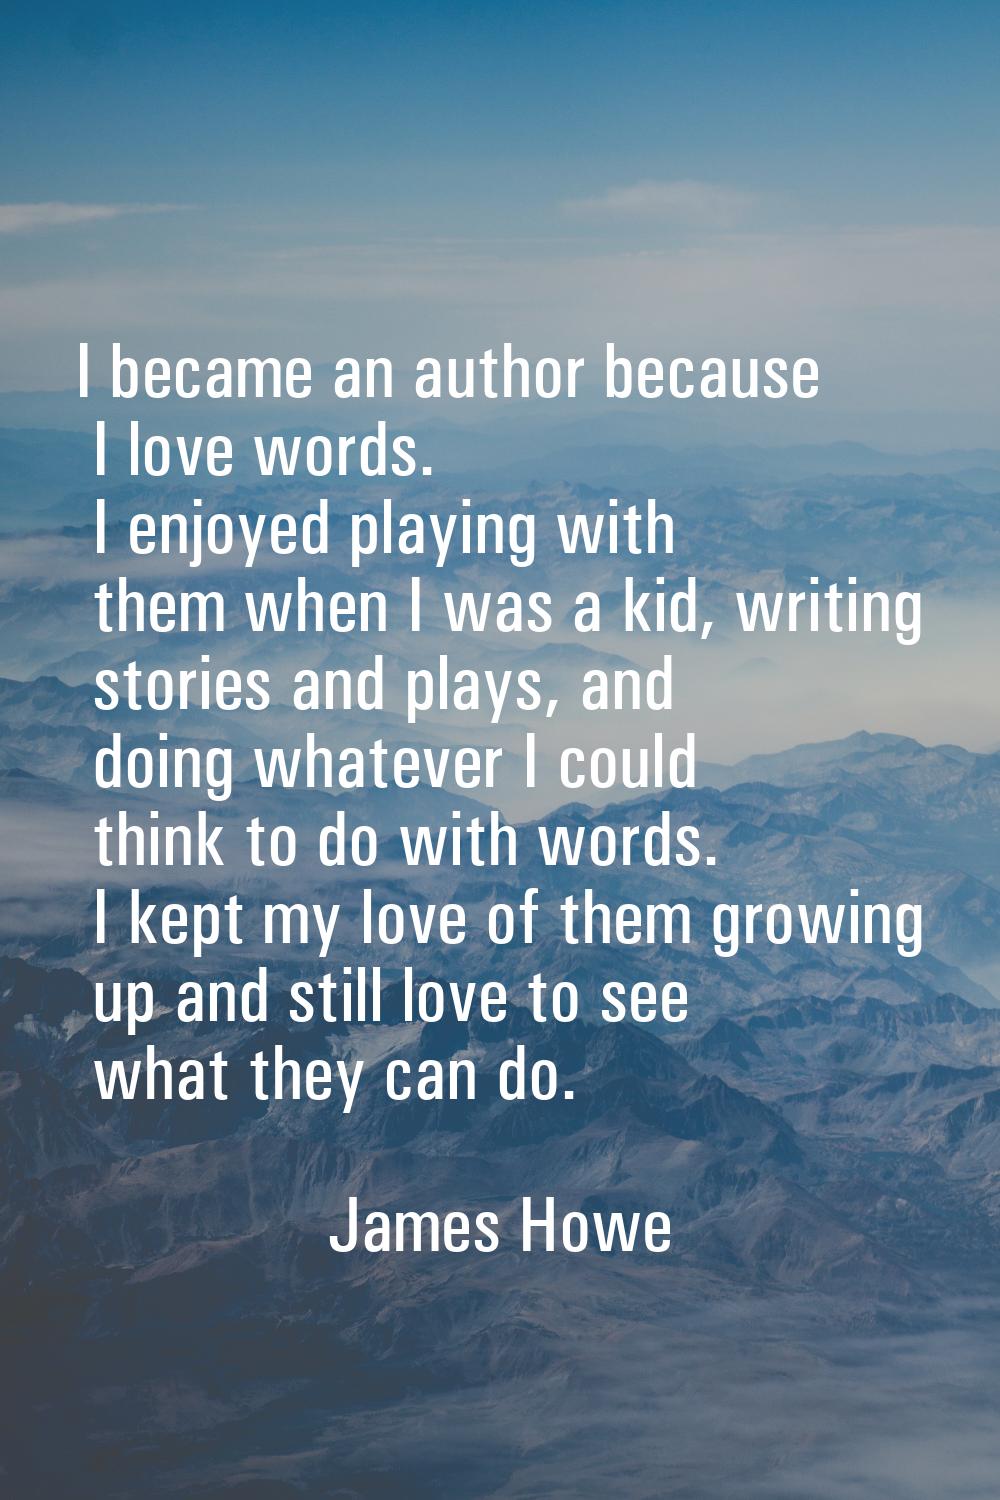 I became an author because I love words. I enjoyed playing with them when I was a kid, writing stor